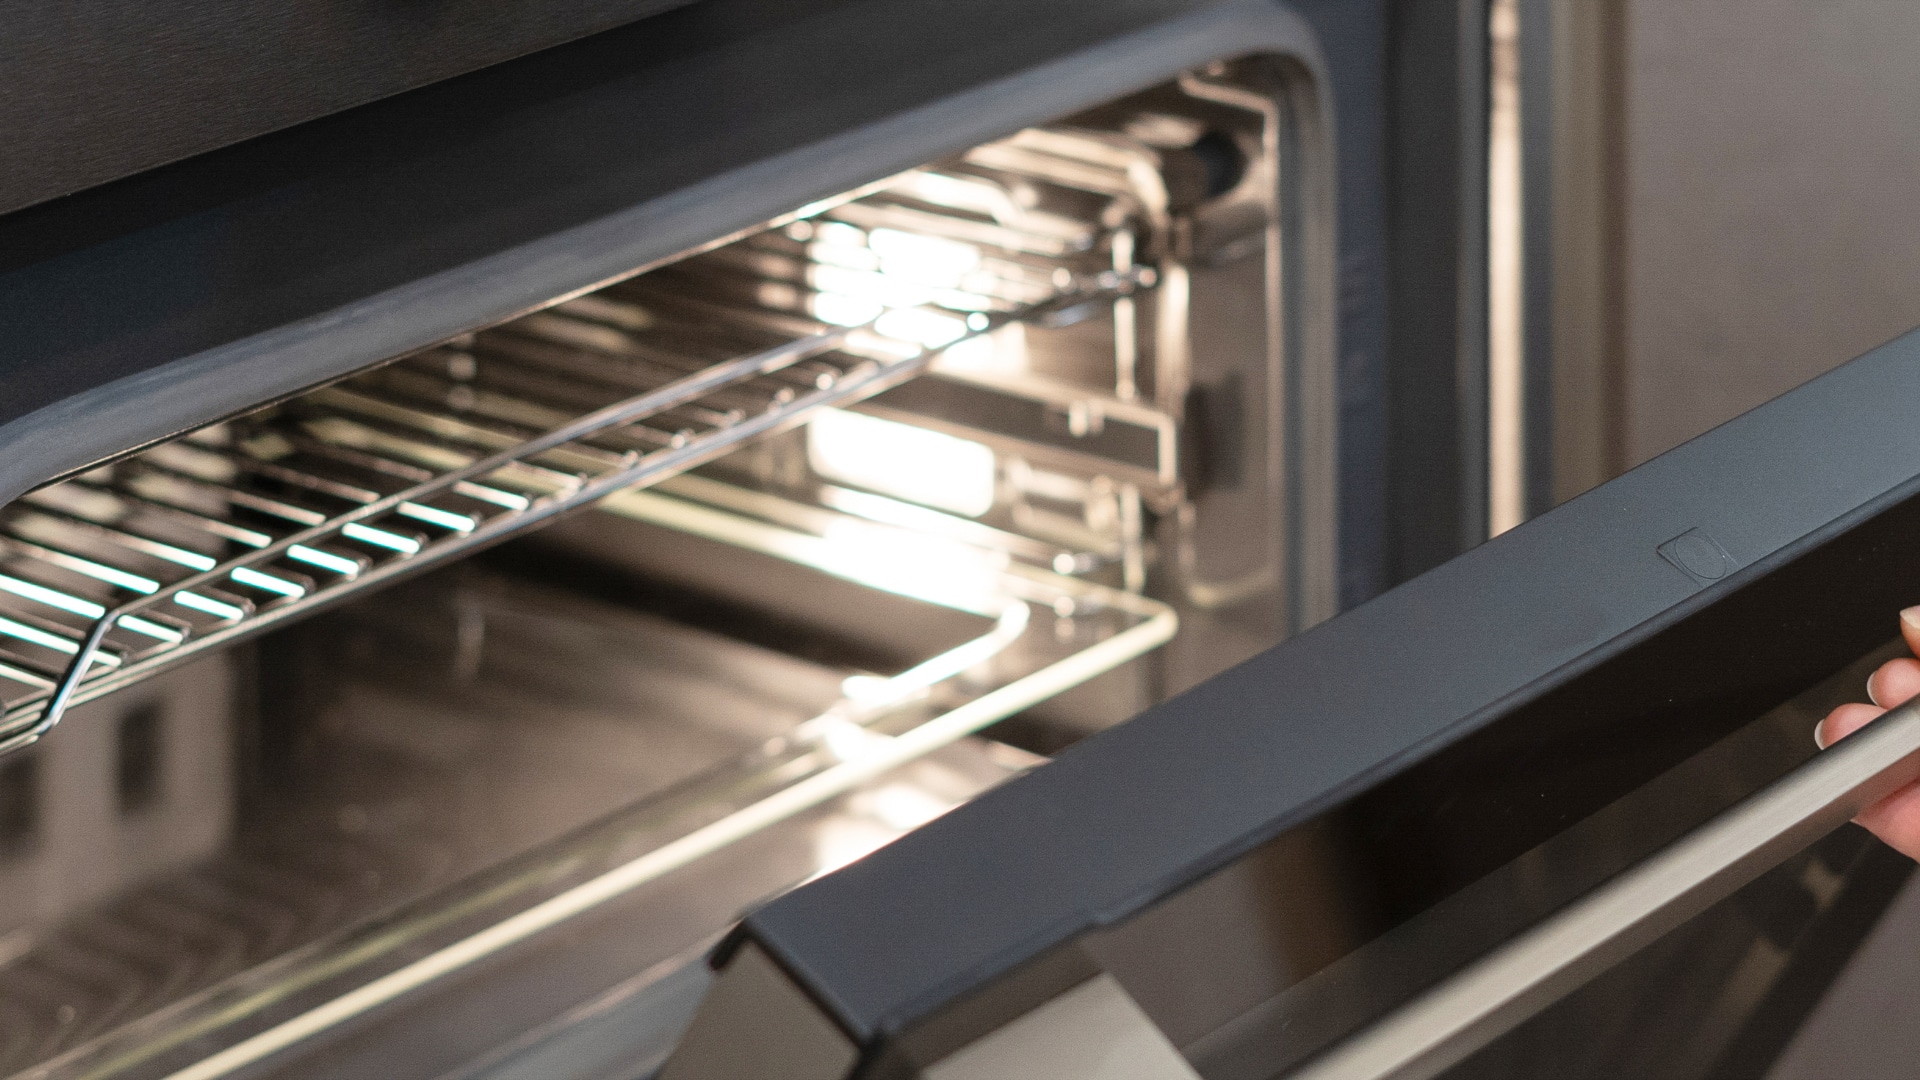 Oven Light Not Working? Here's What to Do - Appliance Express